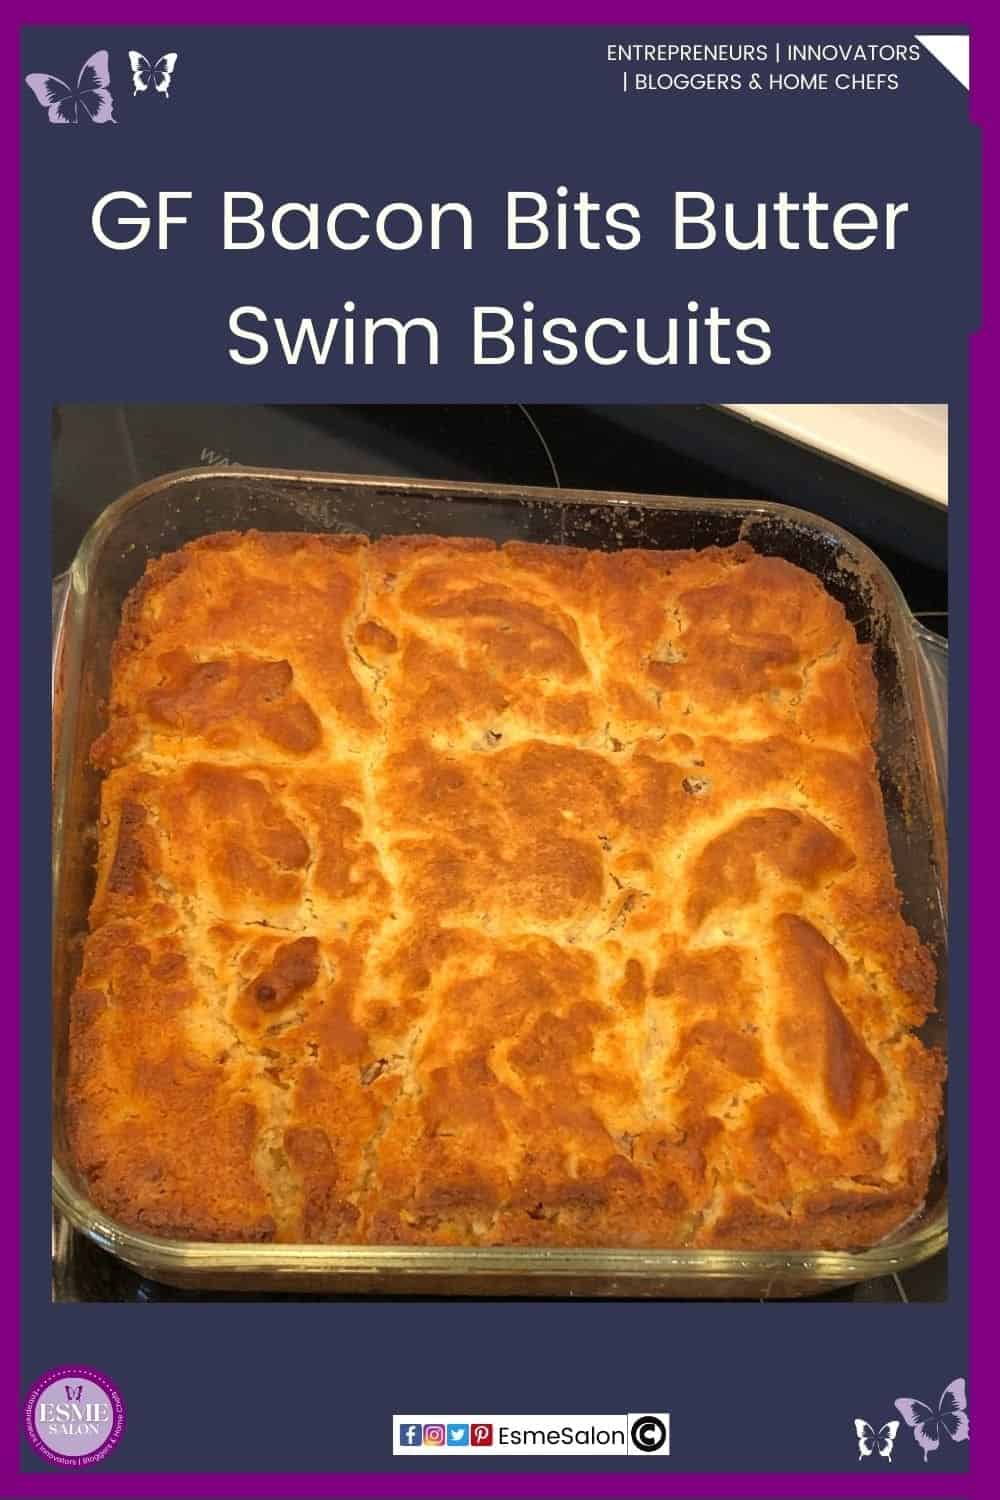 an image of Gluten-Free Bacon Bits Butter Swim Biscuits in a glass dish